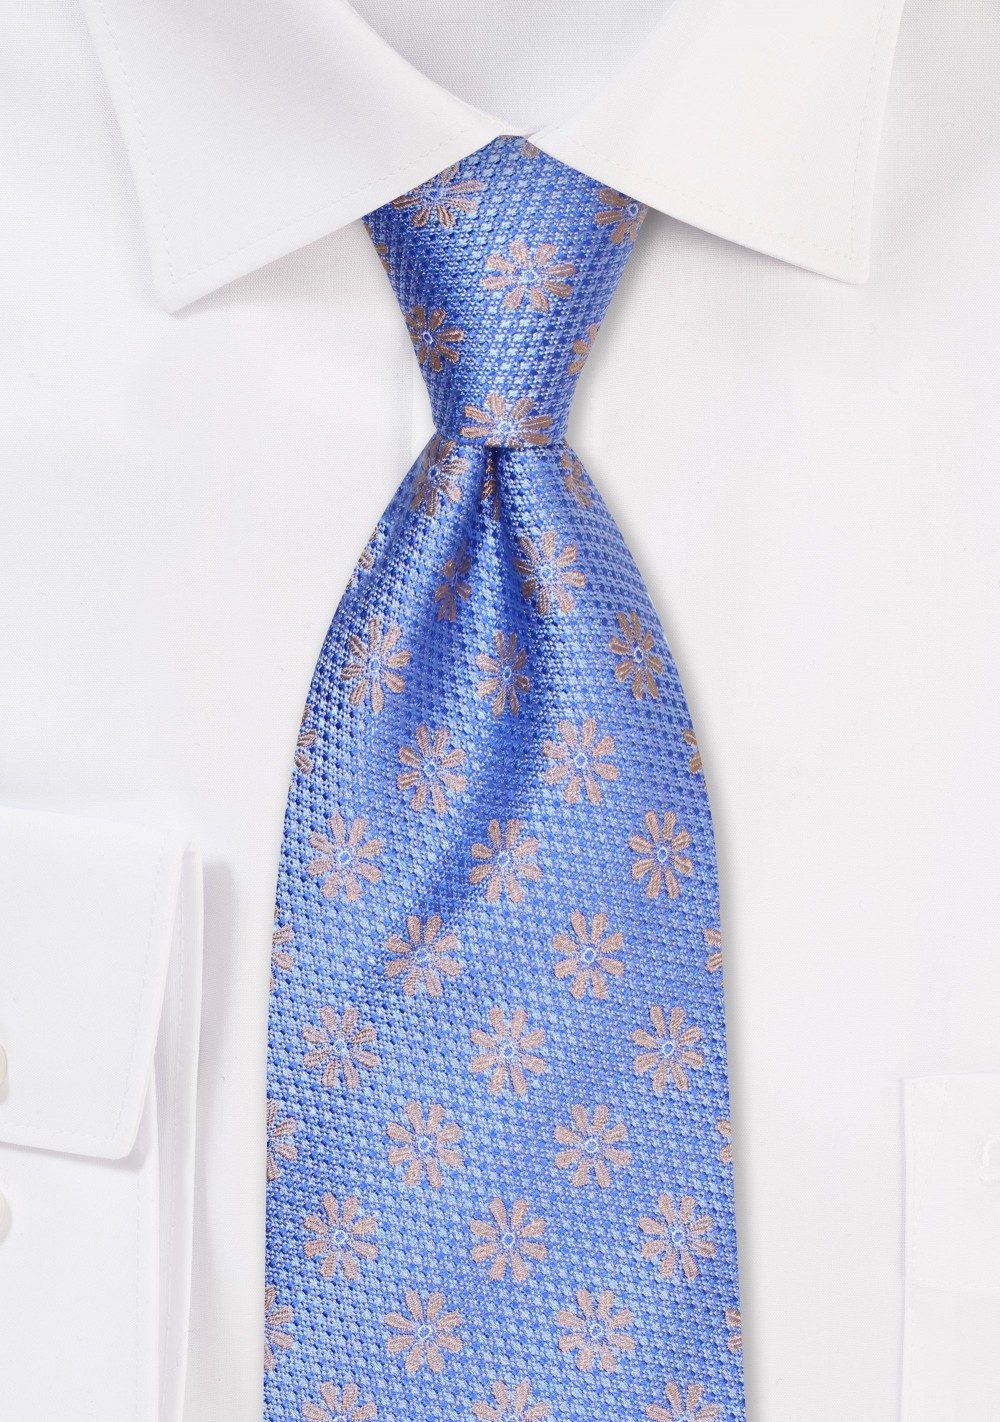 Silk Tie in Royal Blue and Gold | Woven Silk Mens Tie in Royal Blue and ...